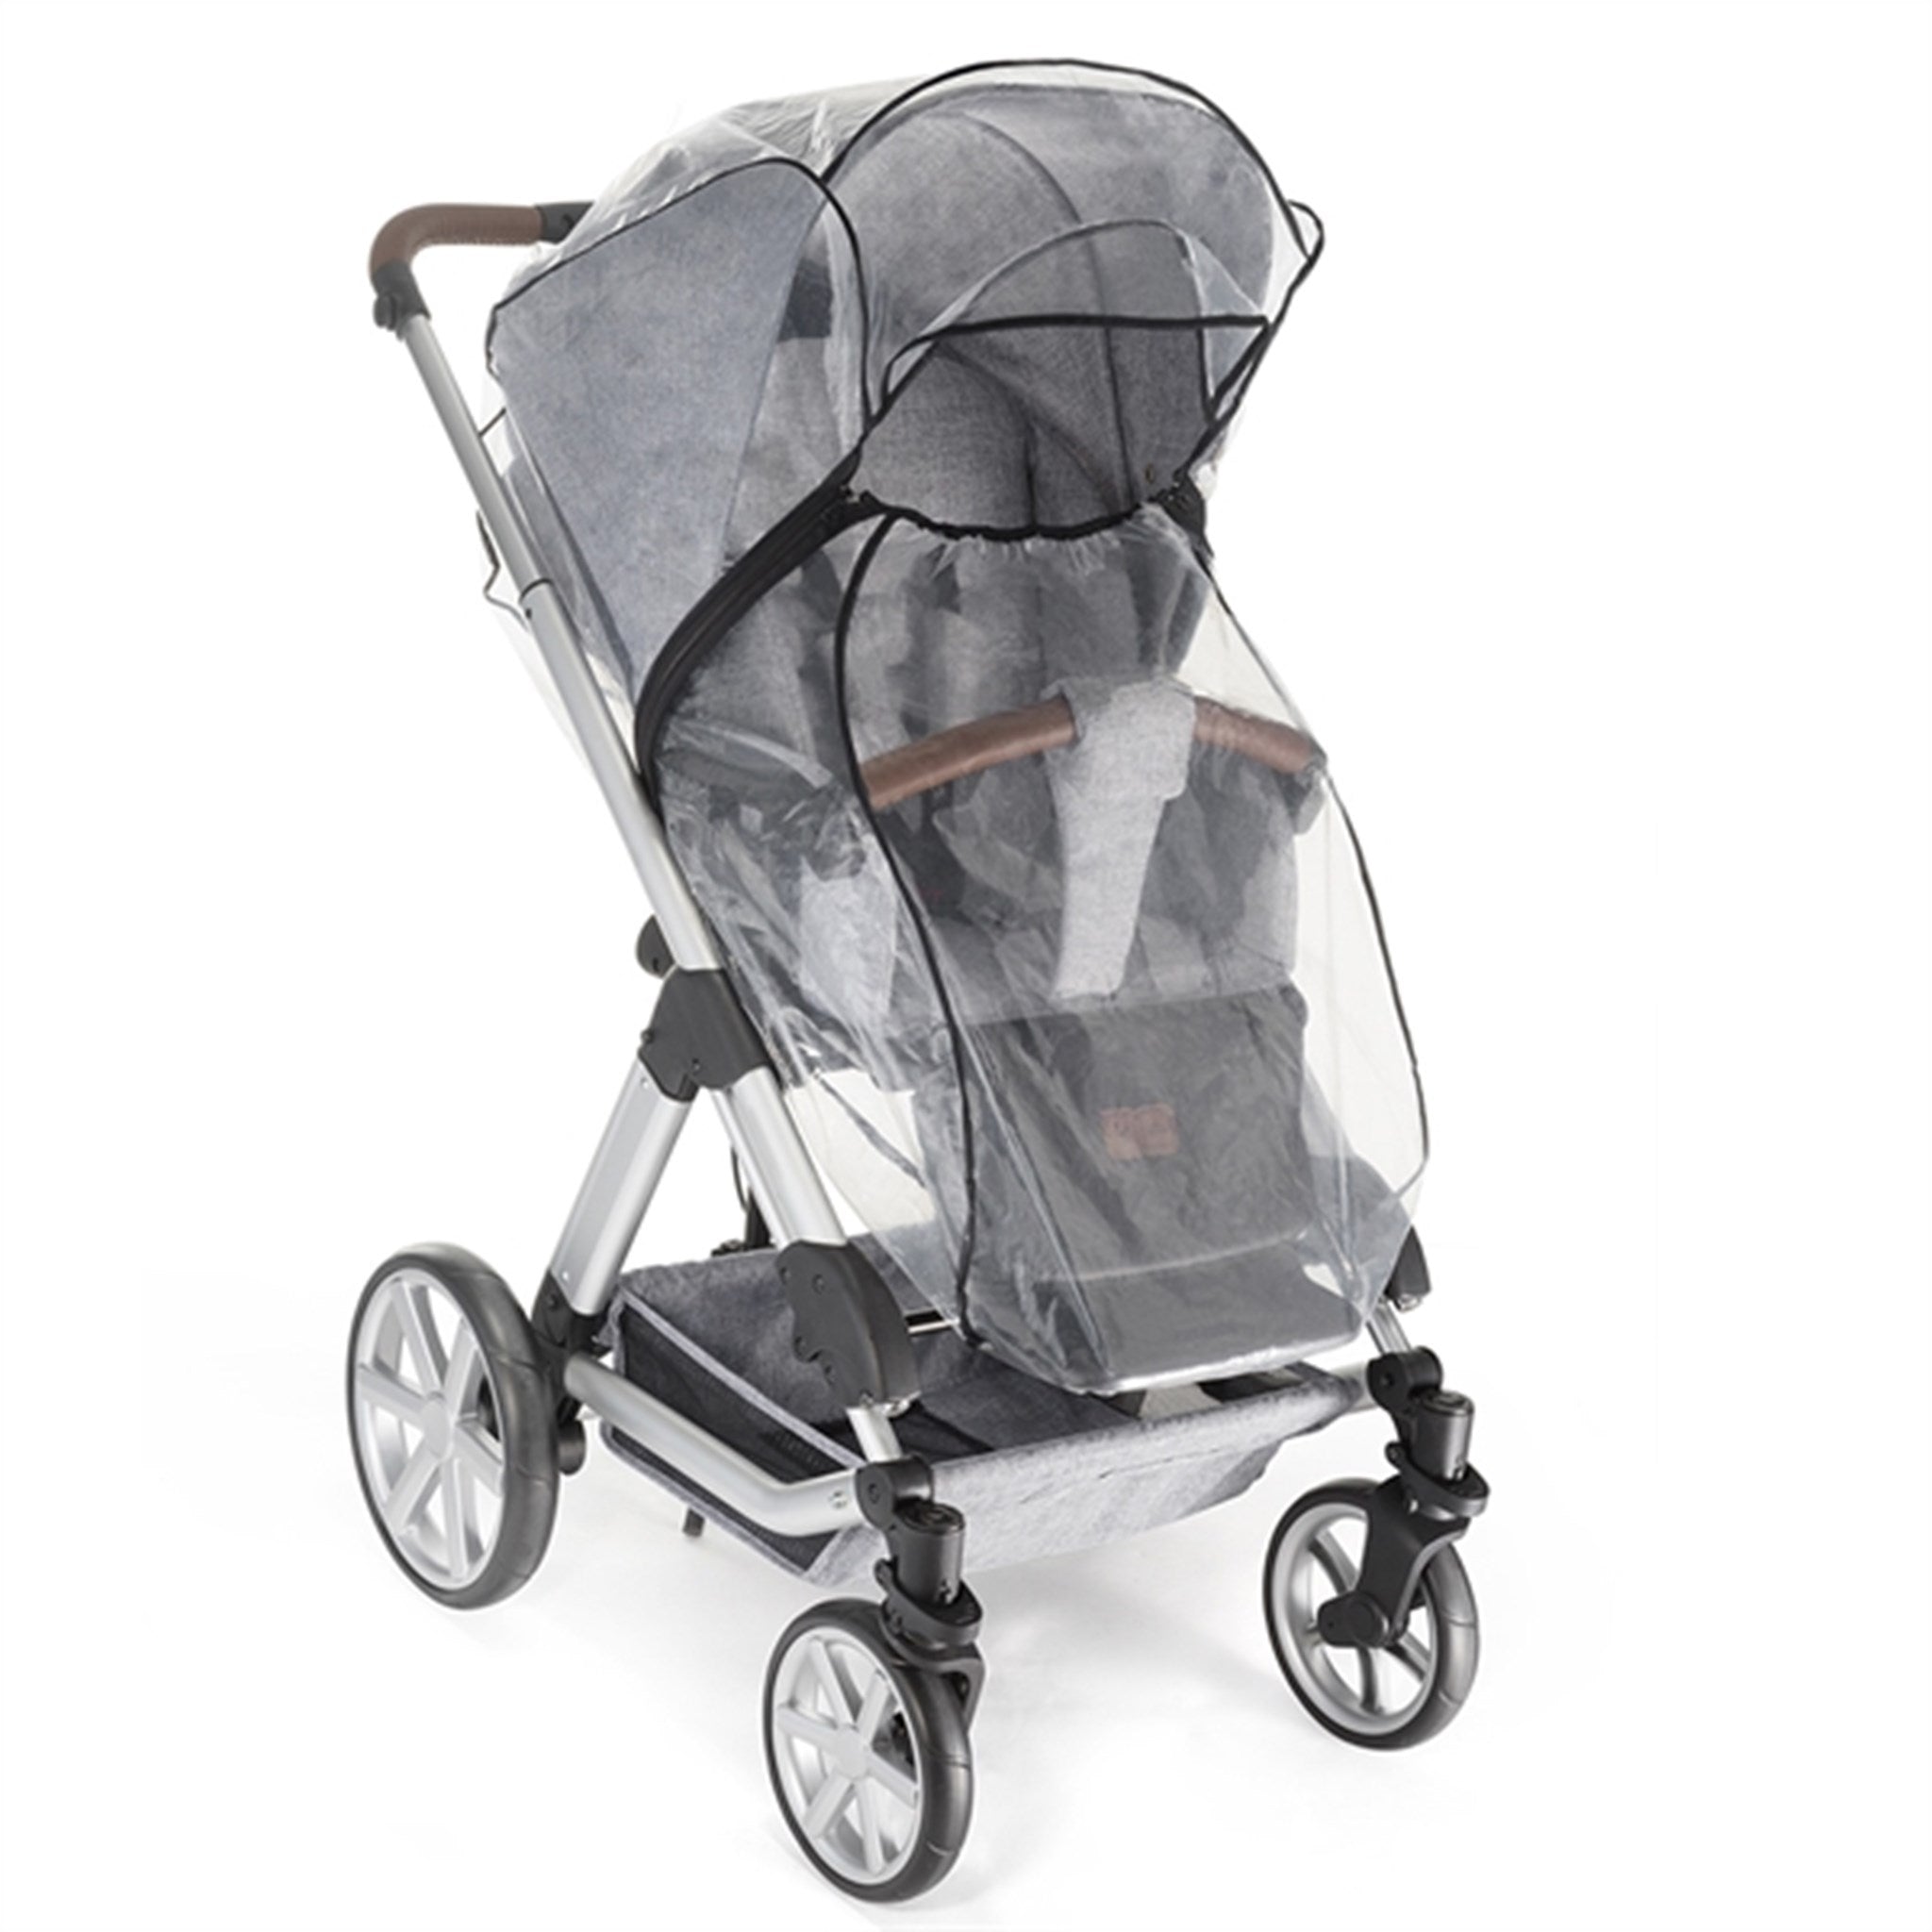 REER Rain cover for Prams and Combi-wagons